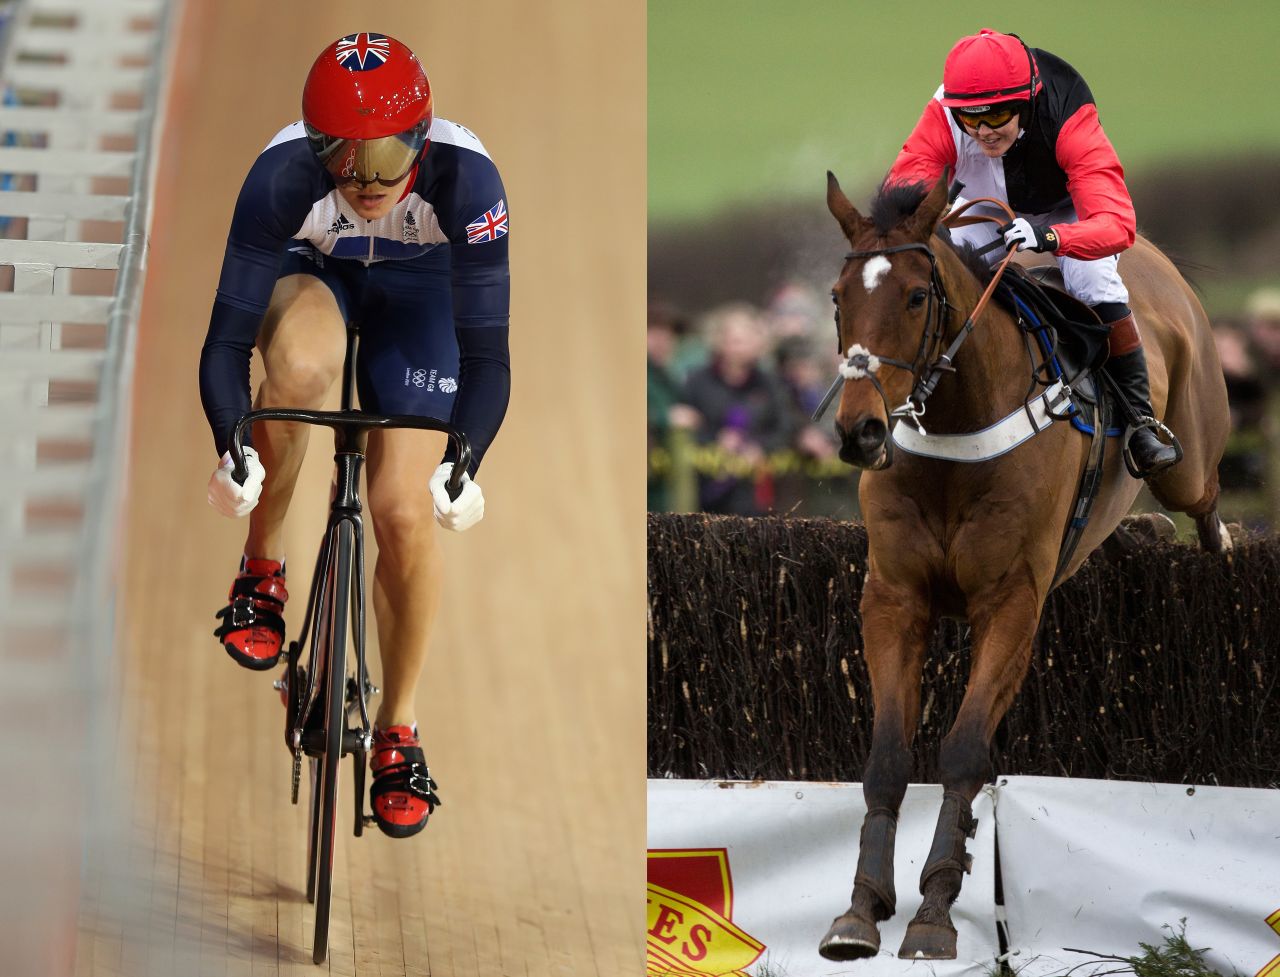 Owen is not the first sportsman to switch to the saddle. Olympic champion track cyclist Victoria Pendleton entered the Foxhunters Chase at 2016 Cheltenham Festival.